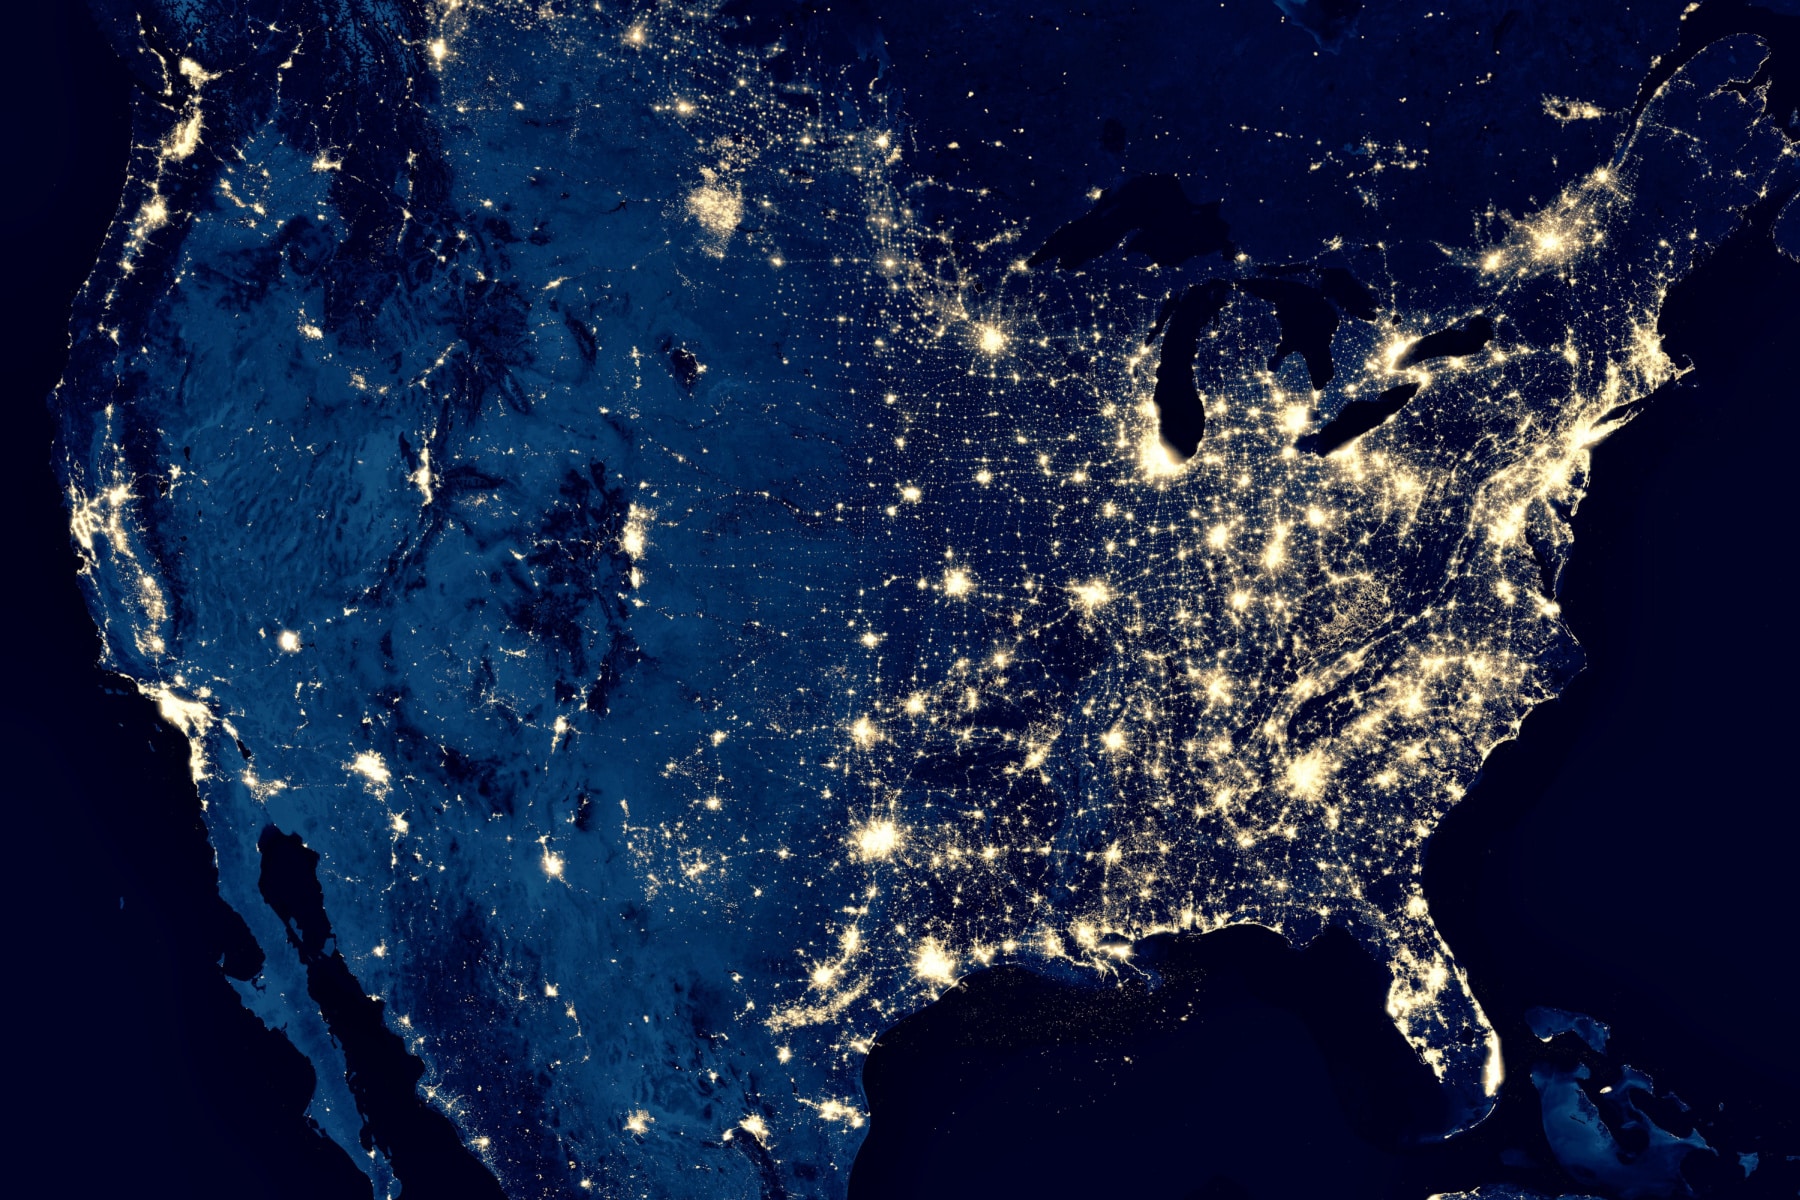 A map of the US showing light pollution. You can see the empty space near Nevada is where the Dark Sky Park road trip would be.